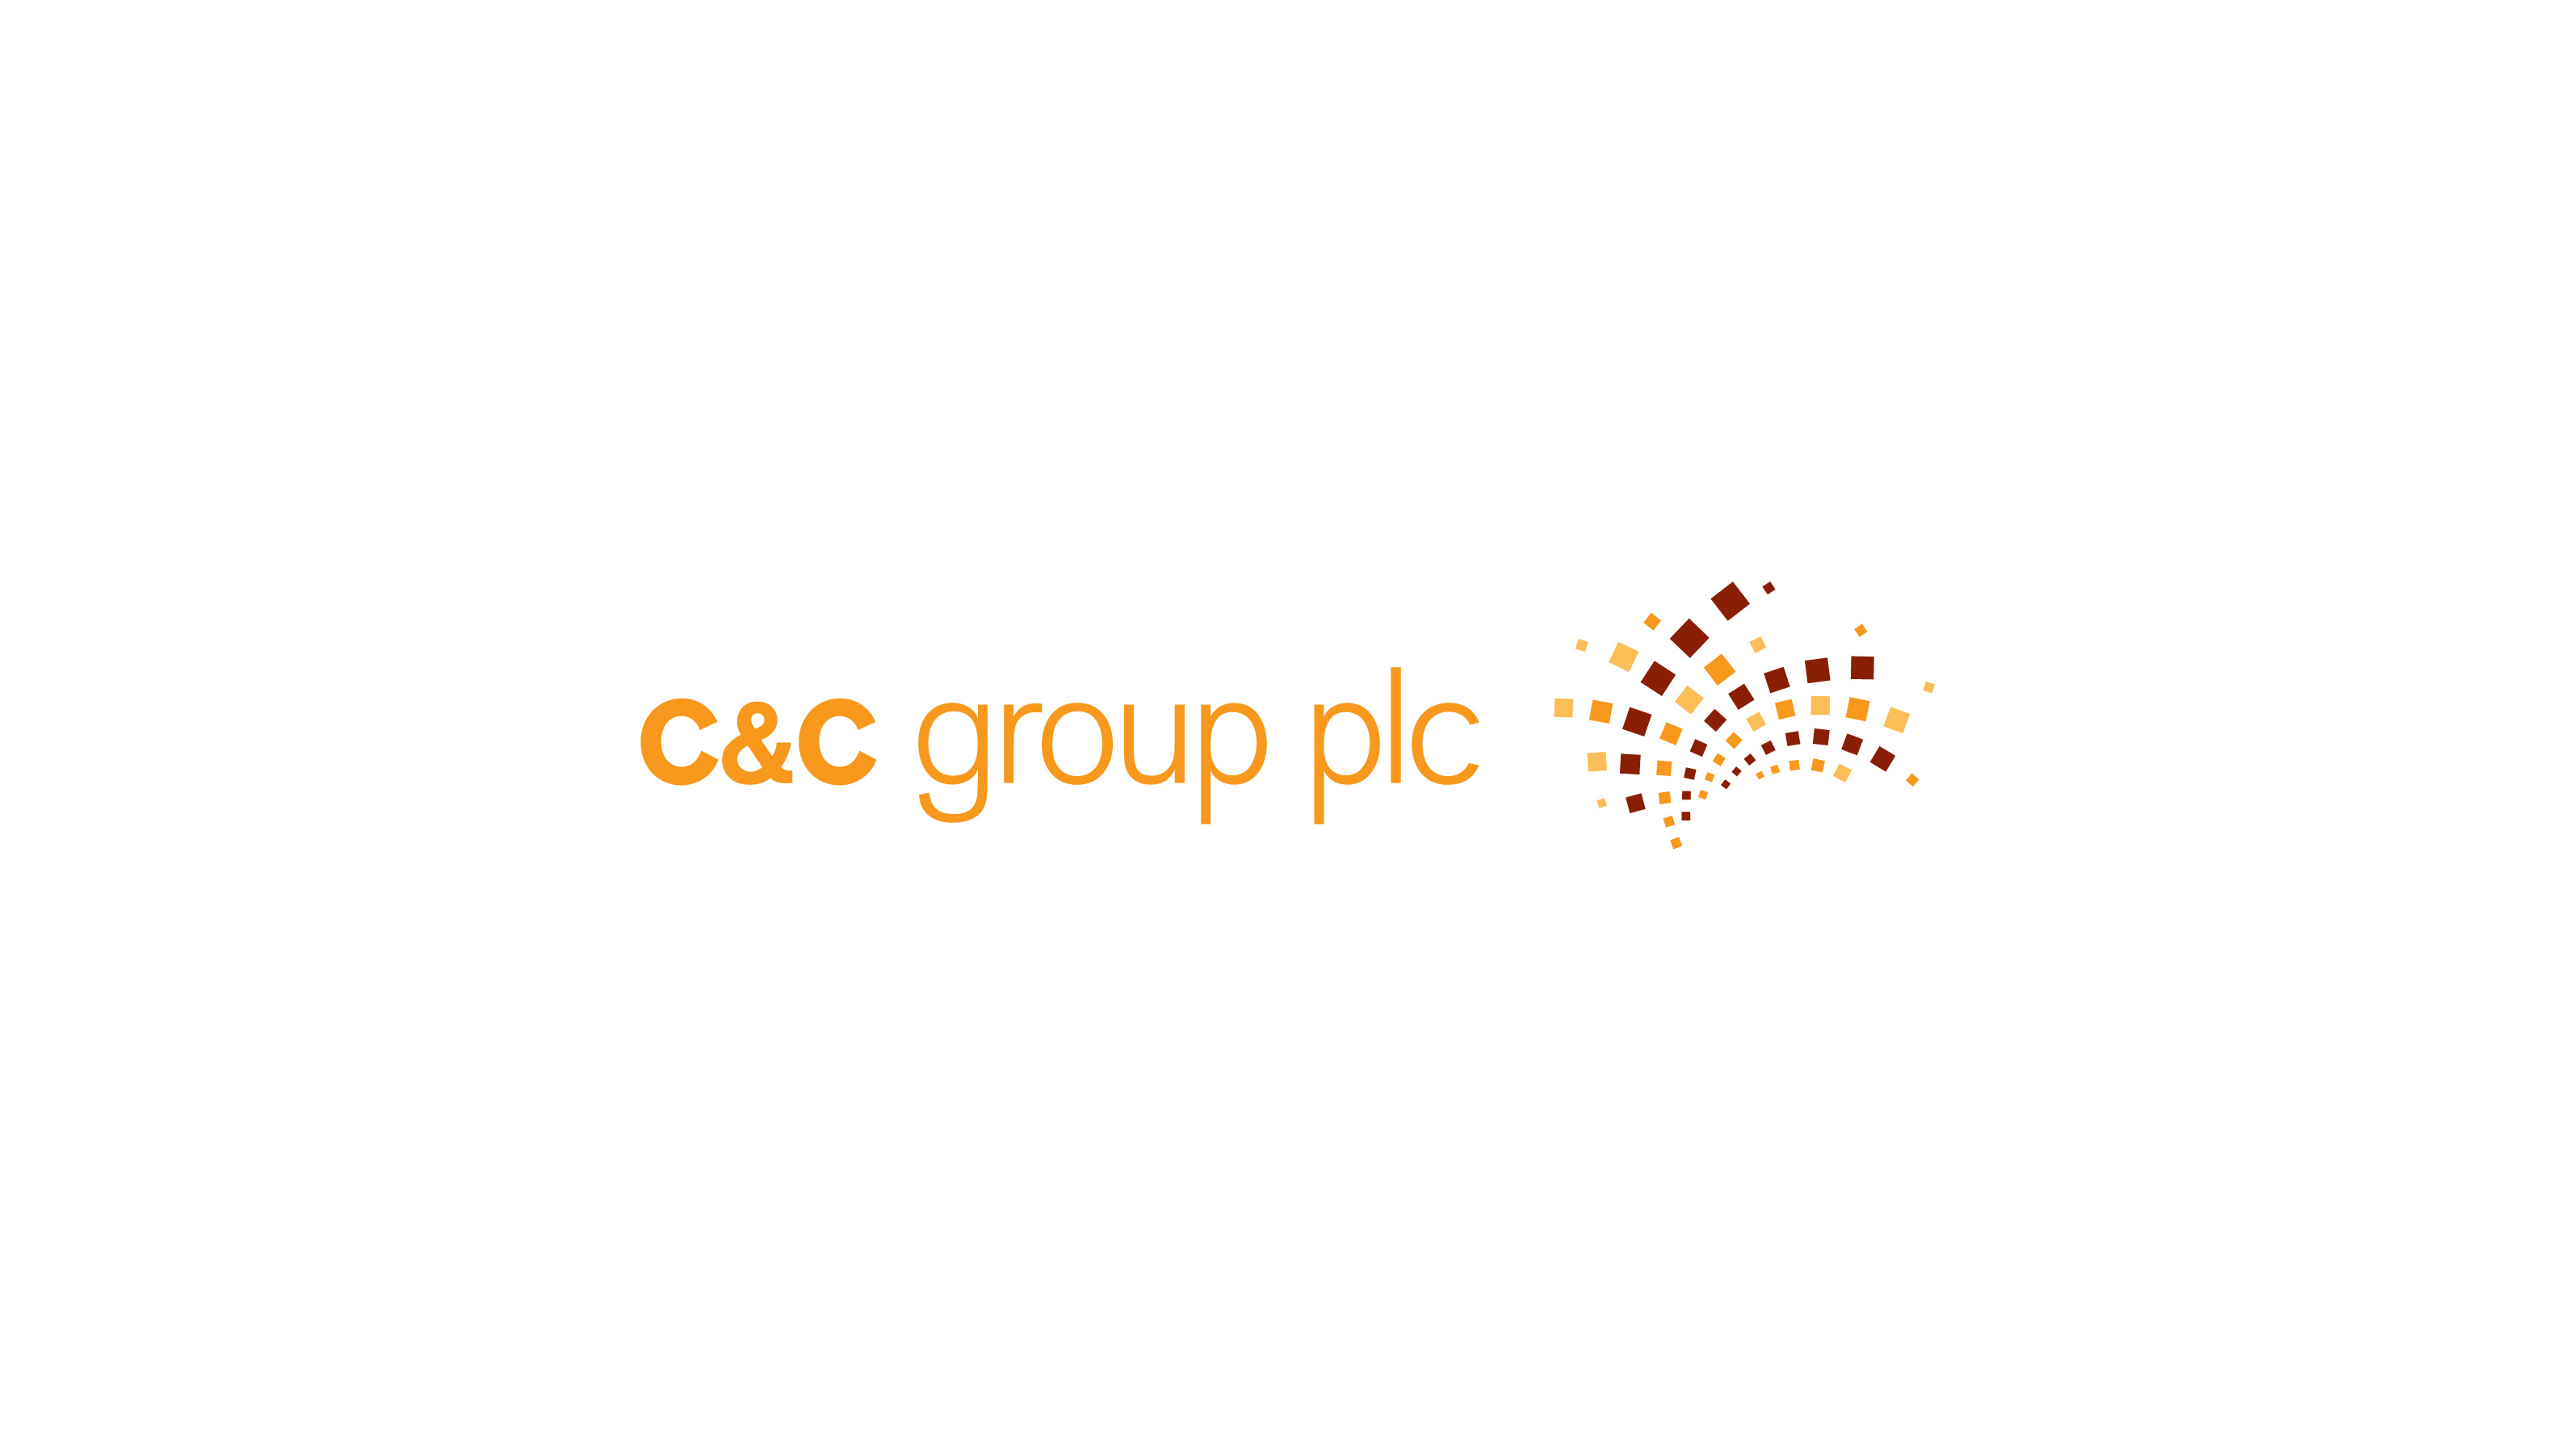 C&C expects to deliver net revenue of approximately €870m